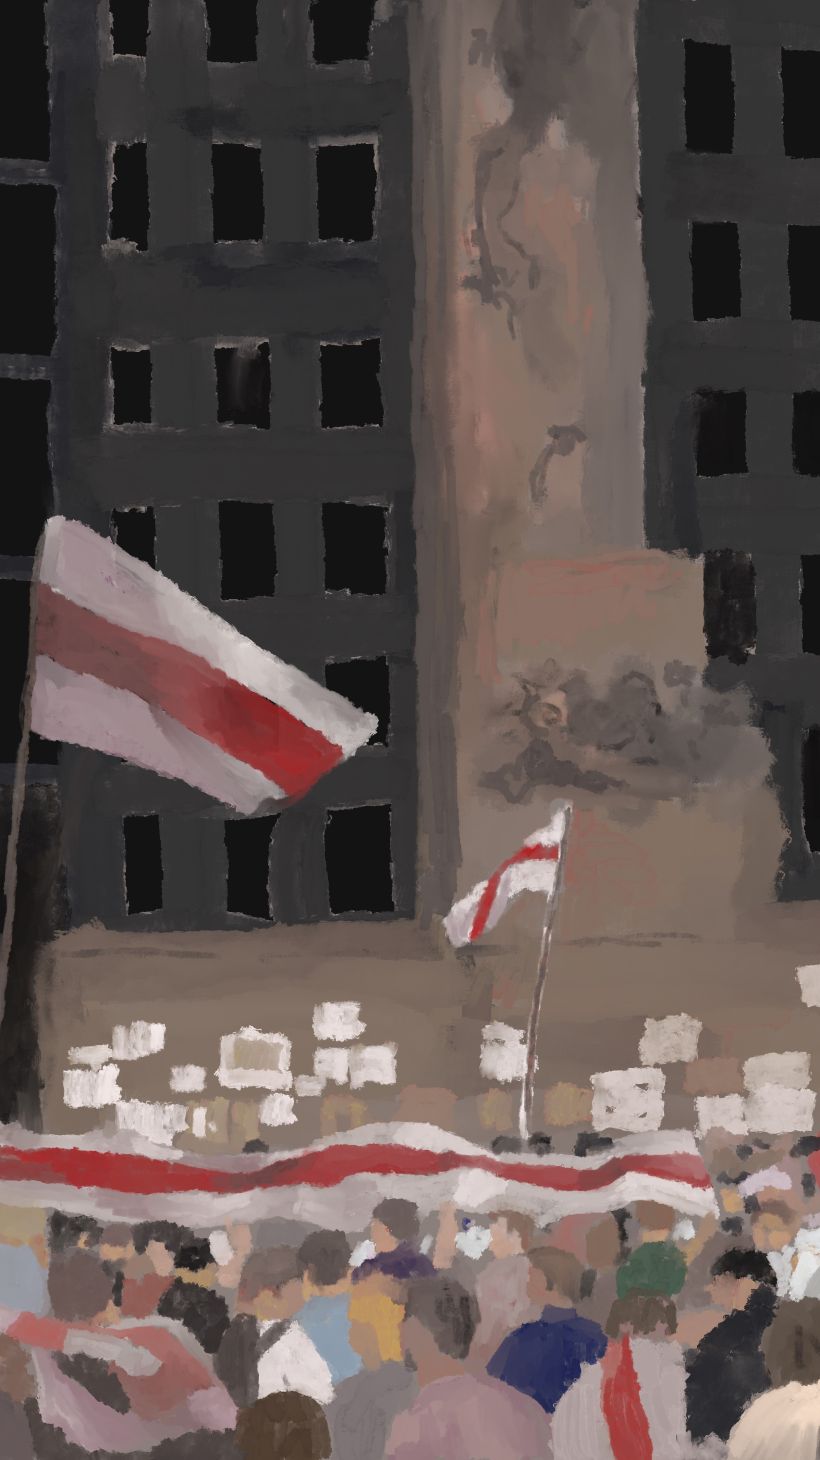 An illustration of a large crowd of people outdoors holding Belarus flags and signs in a protest.